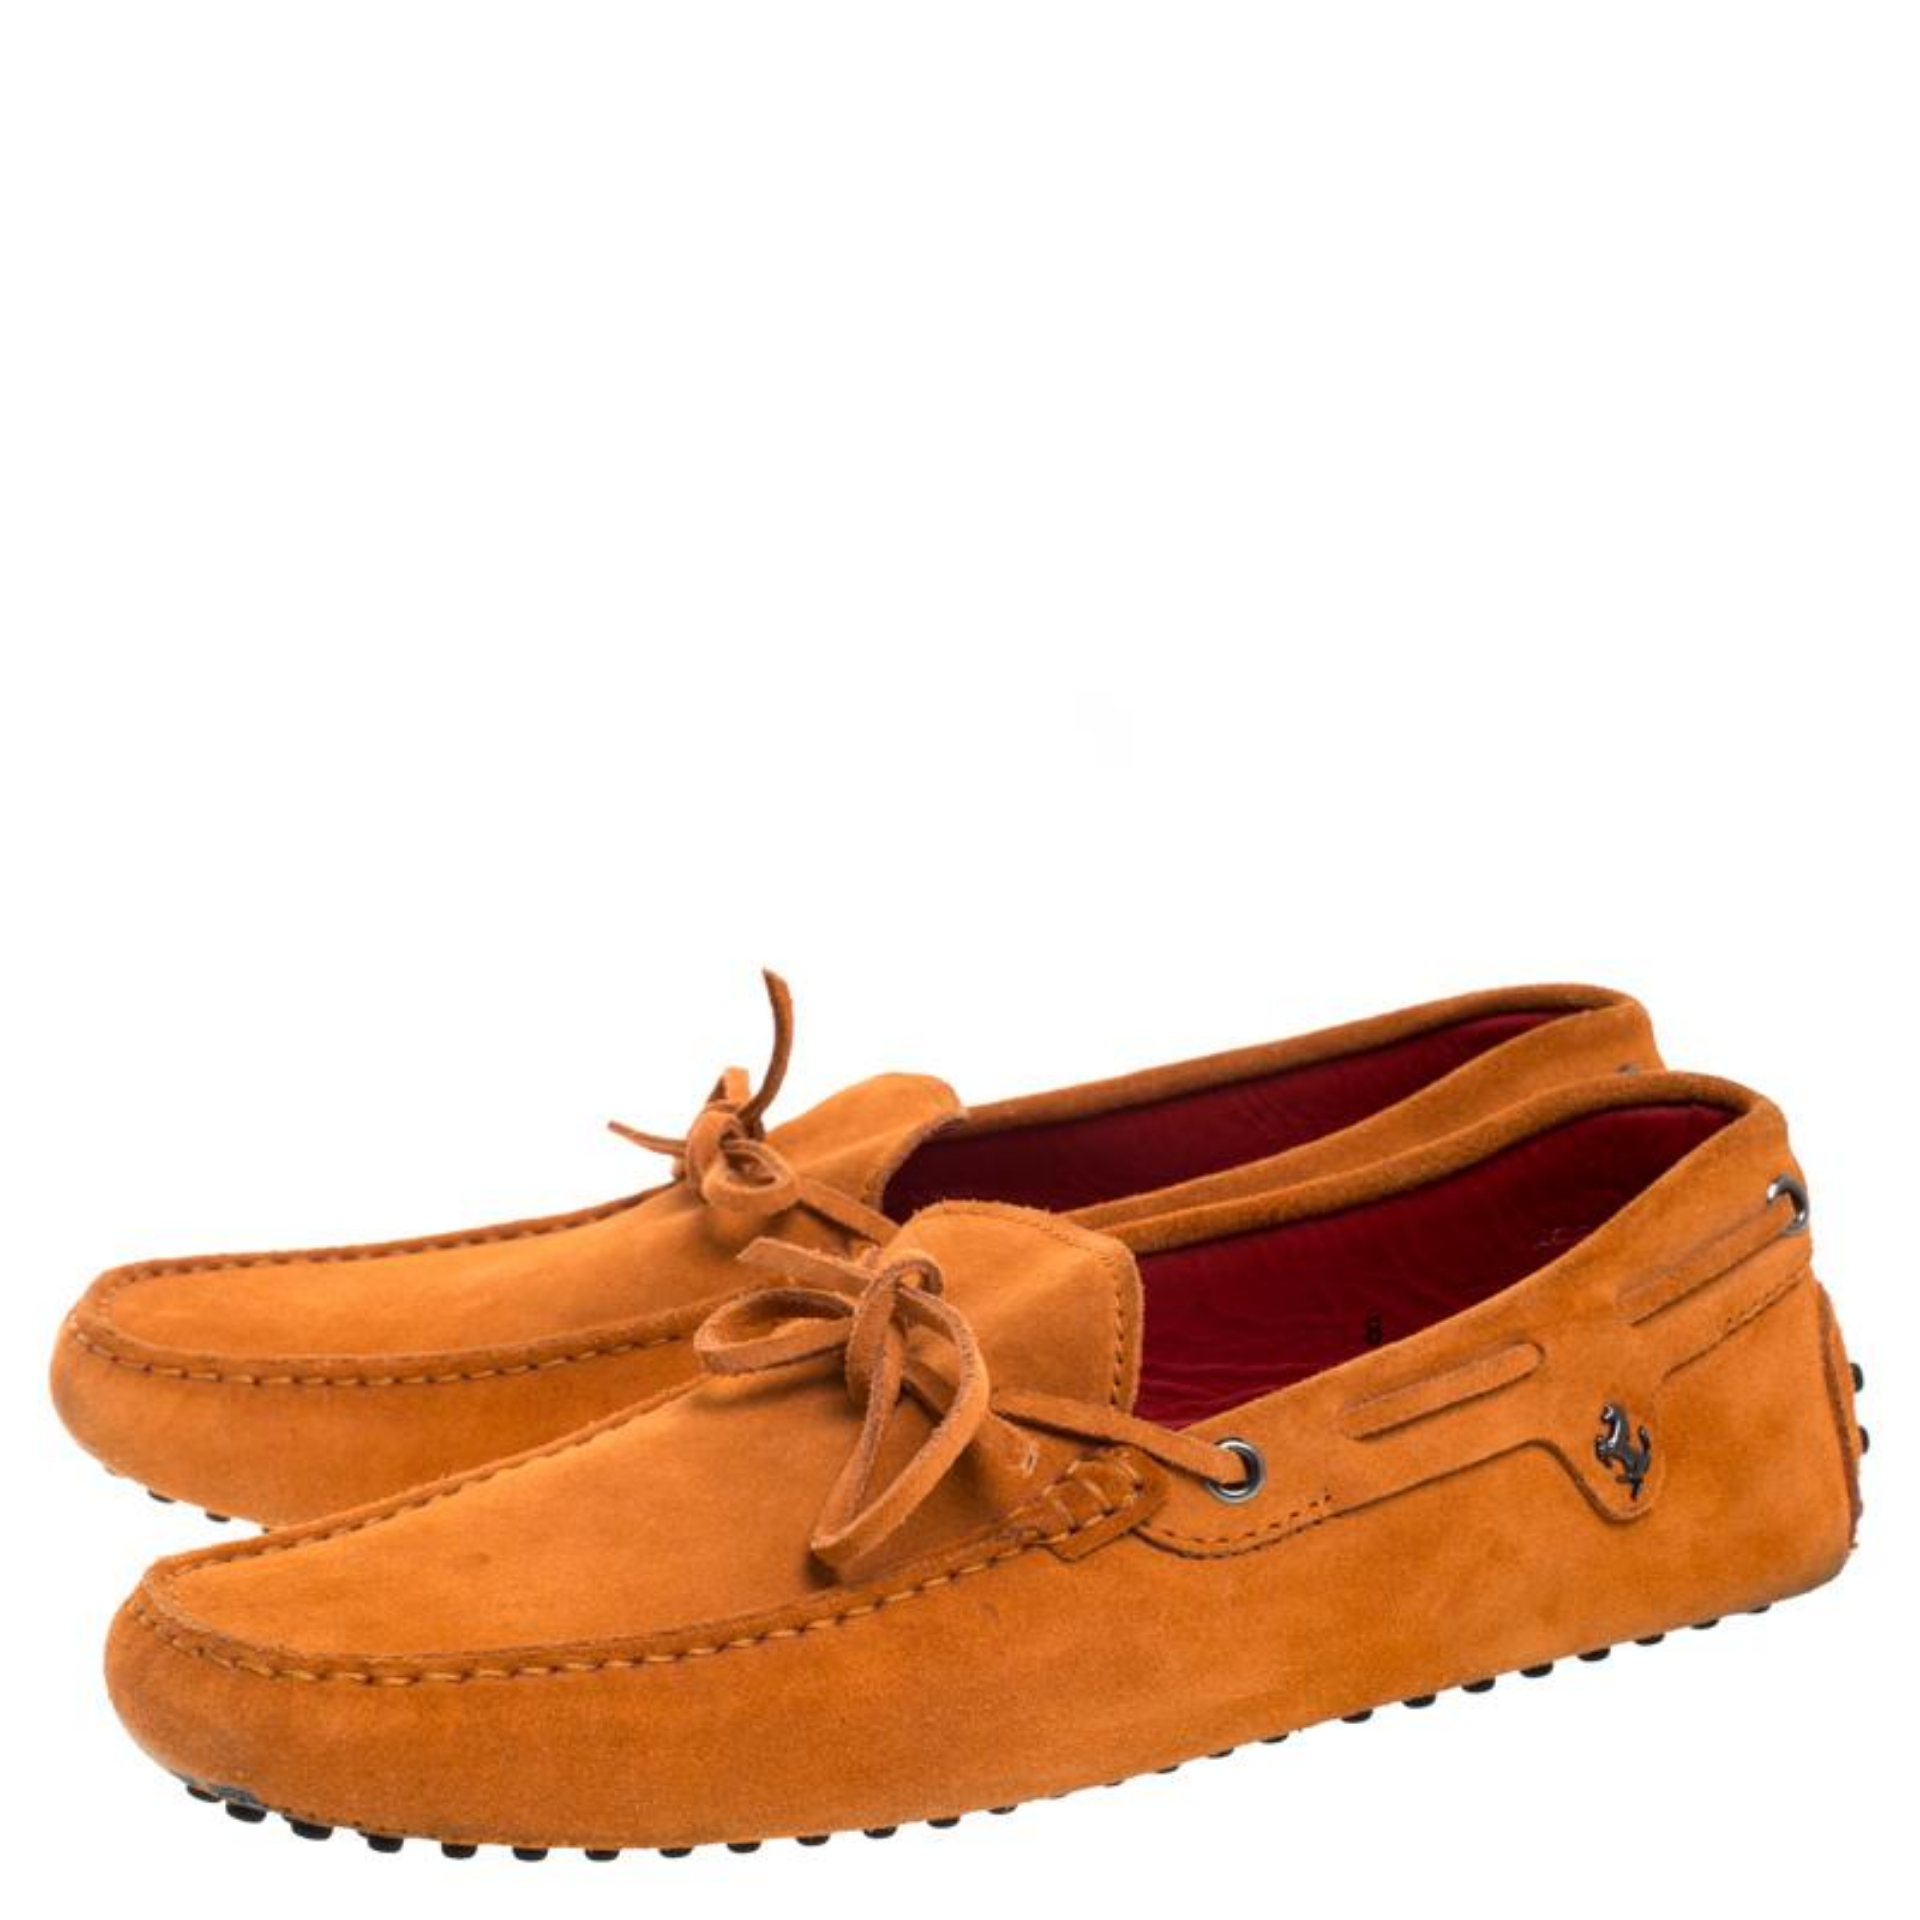 Tod's For Ferrari Orange Suede Bow Moccasins Size 42